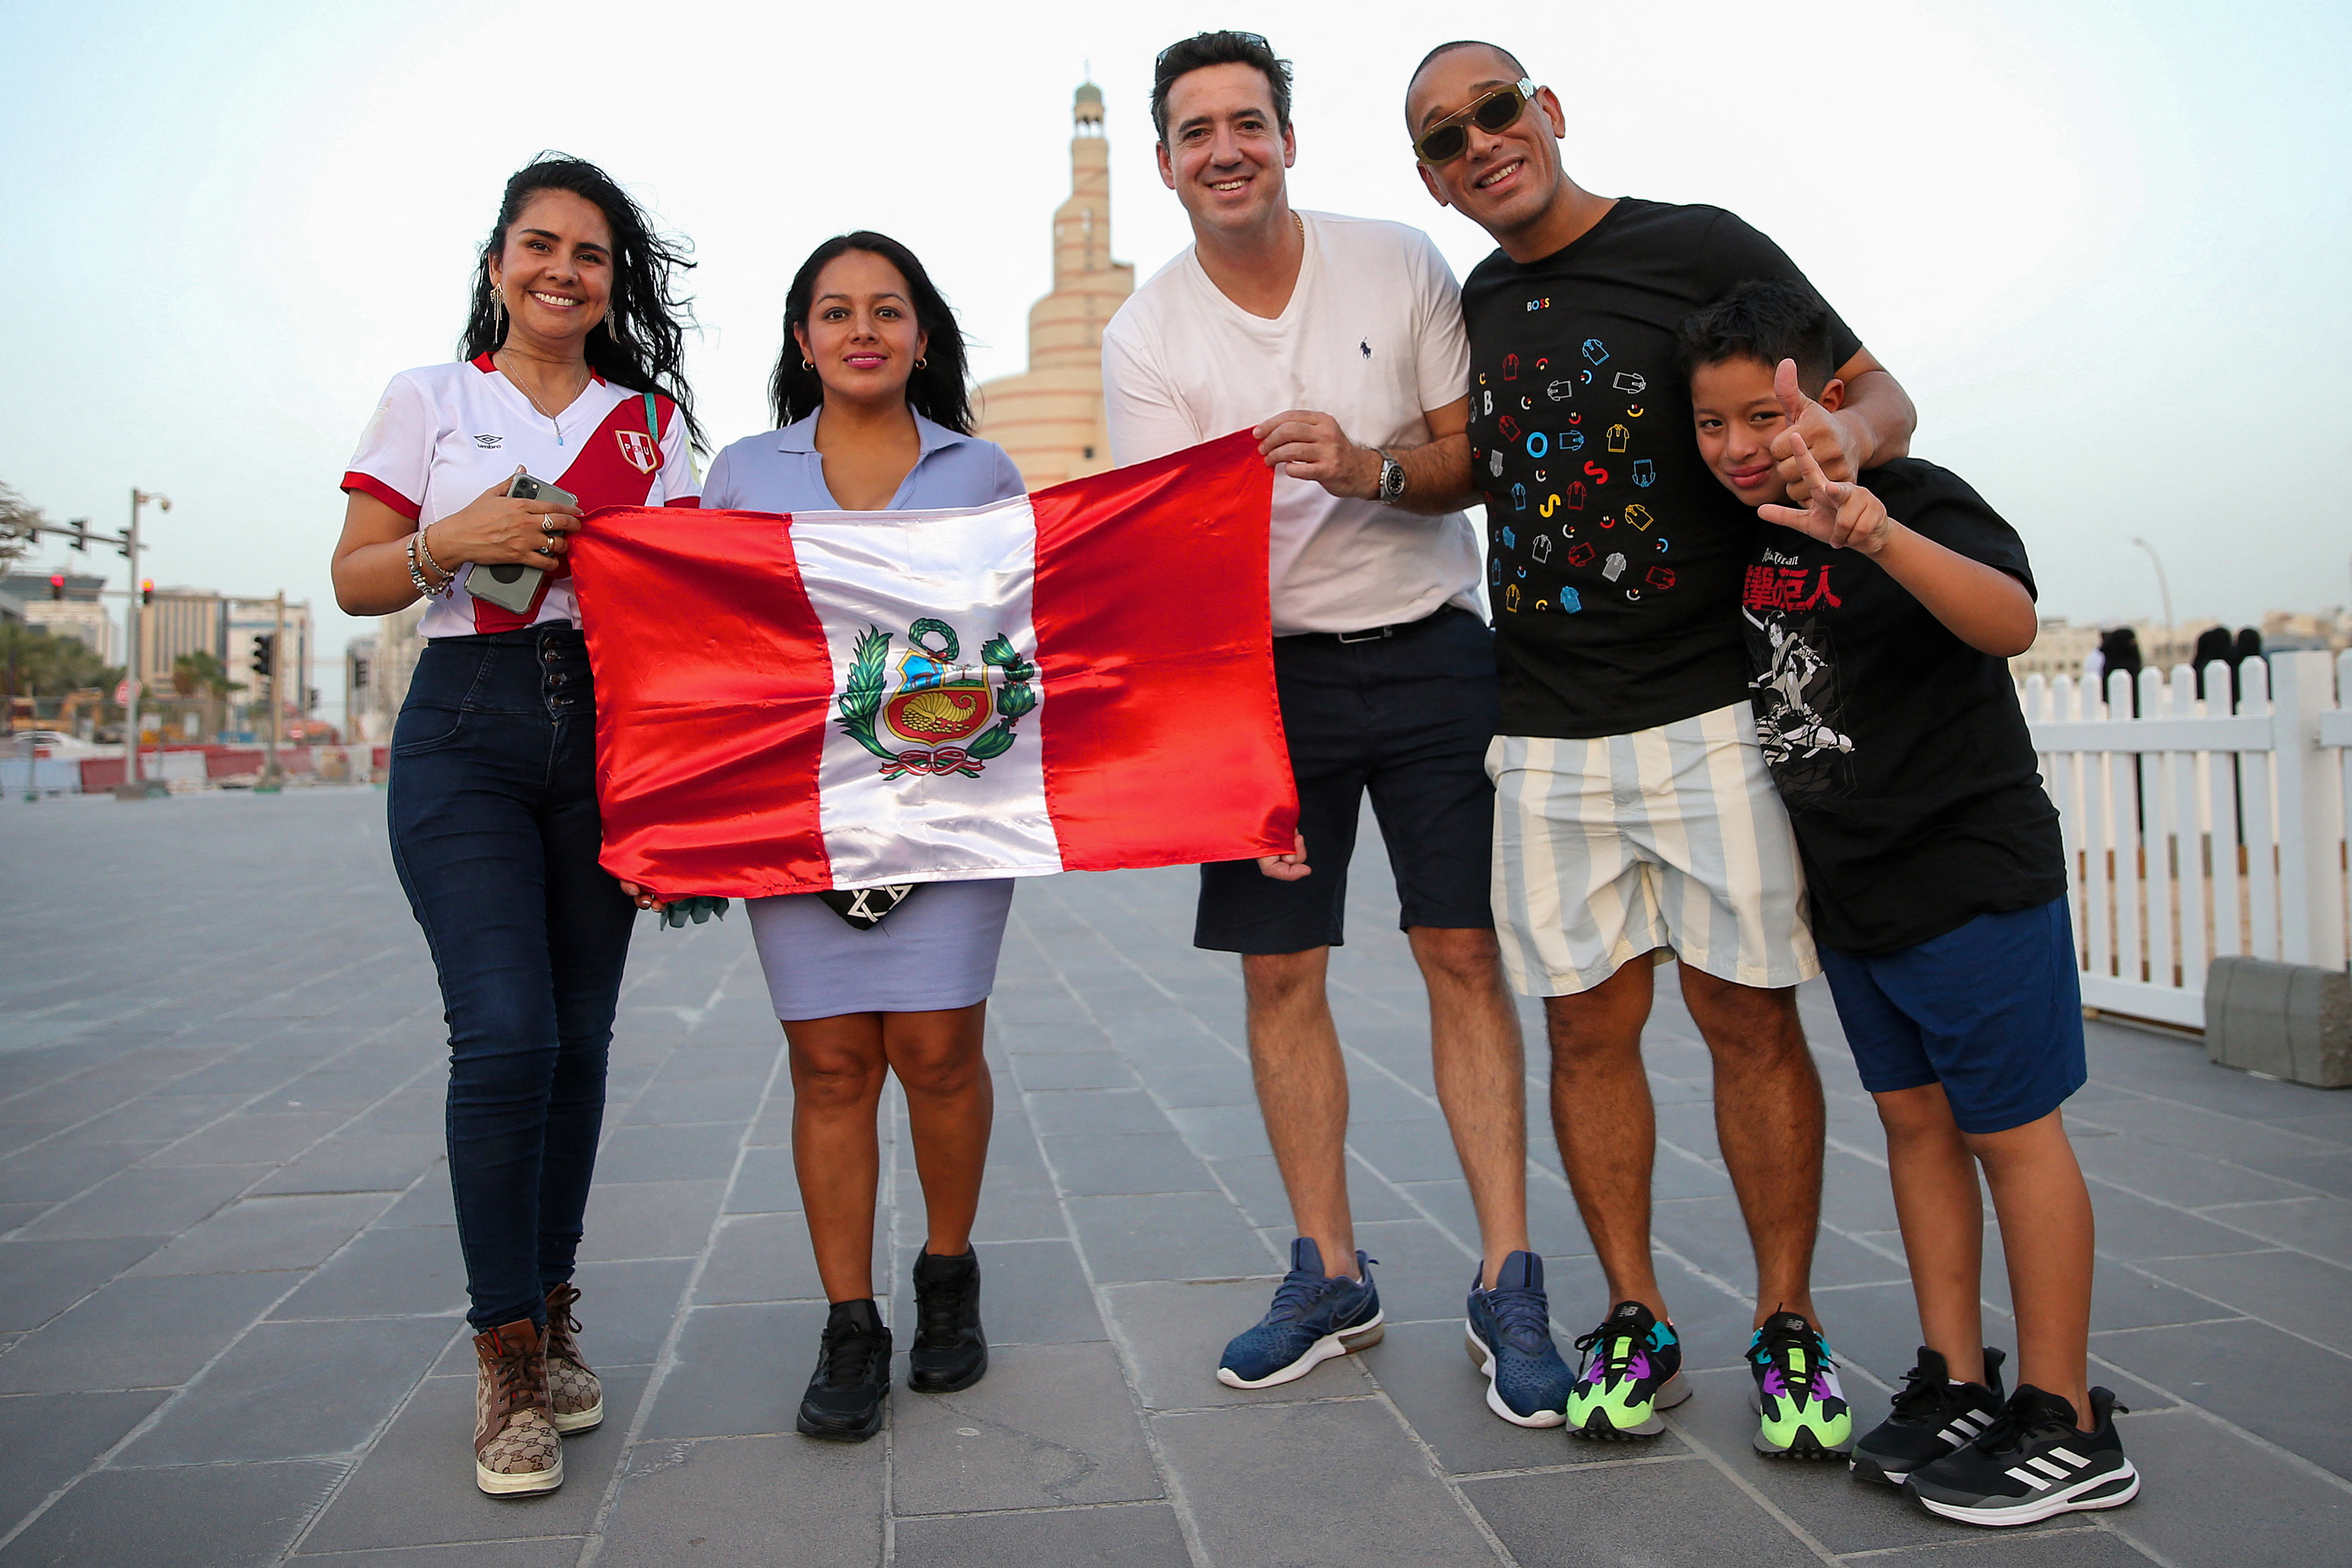 Peru supporters pose for a picture in the Qatari capital Doha on June 11, 2022